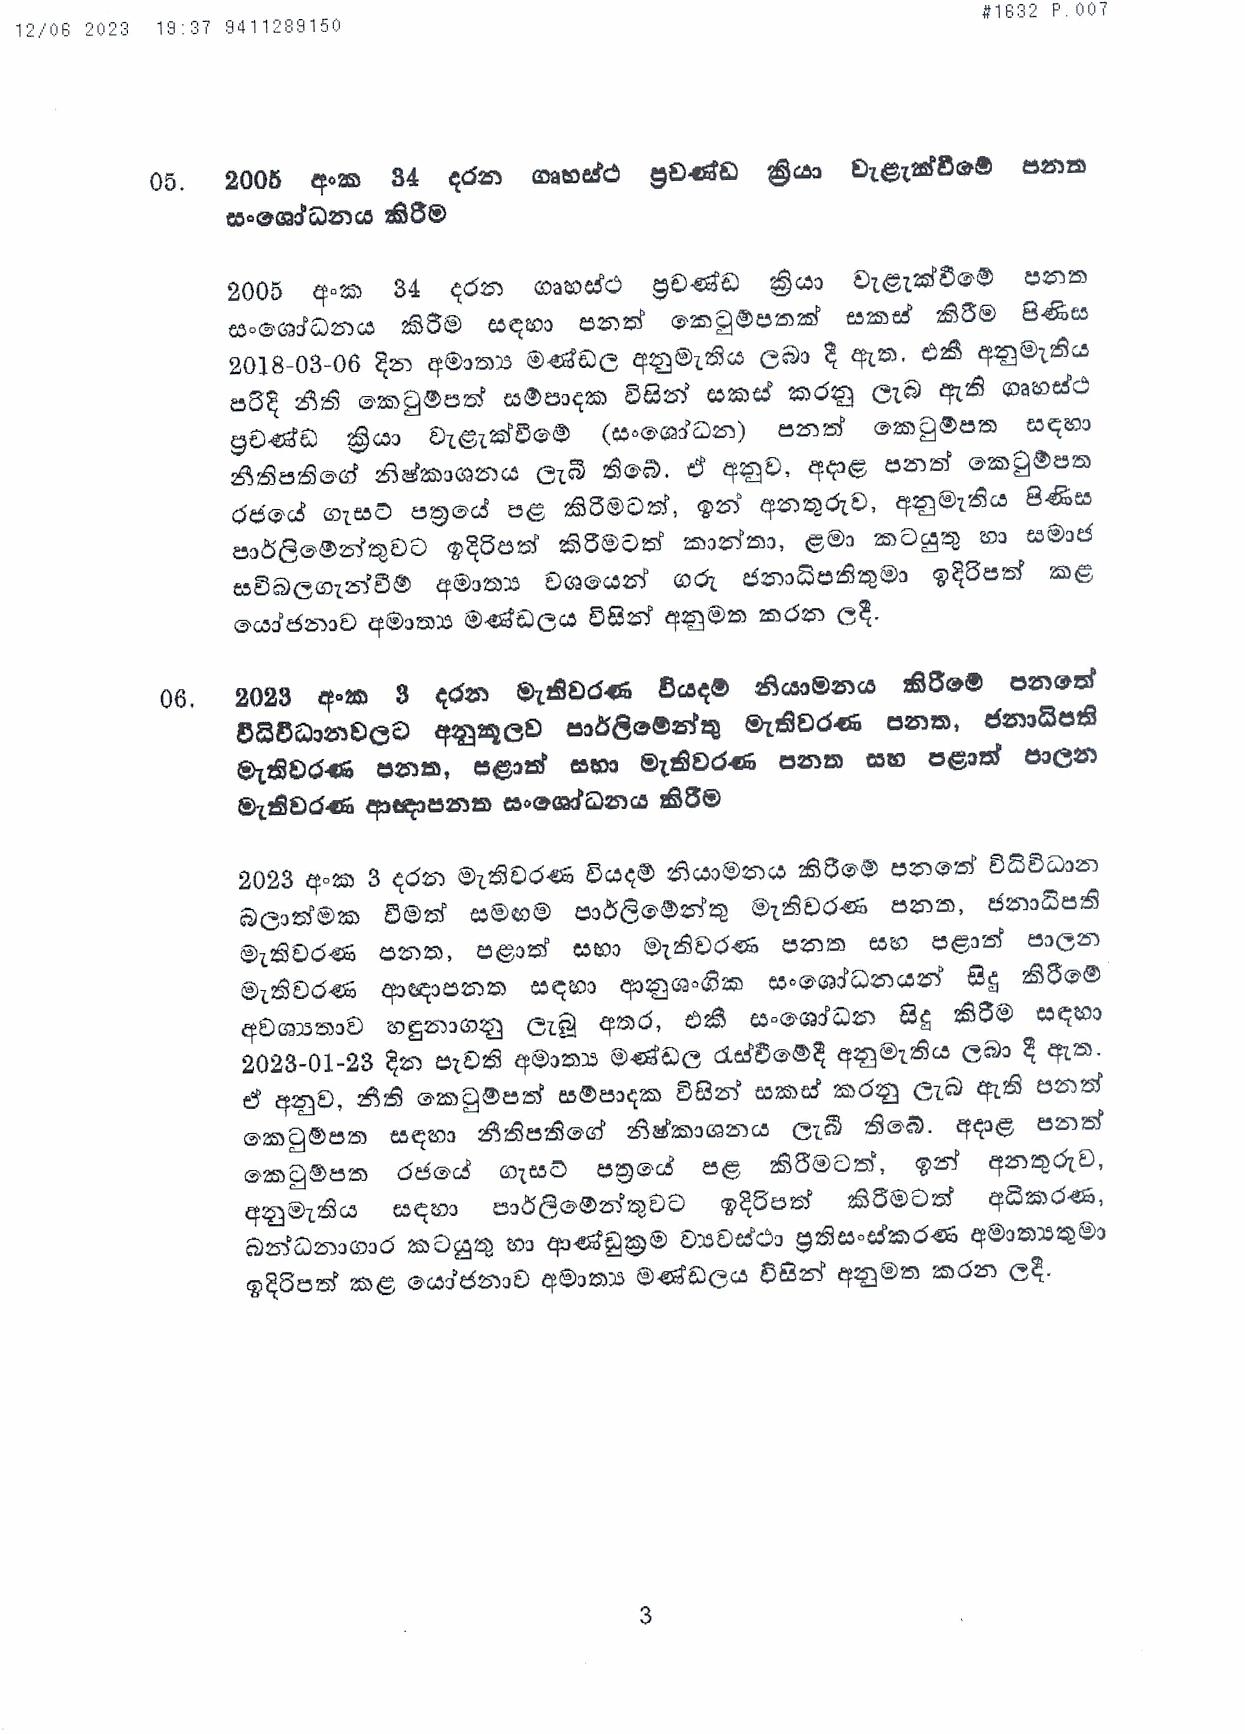 Cabinet Decision on 12.06.2023 page 003